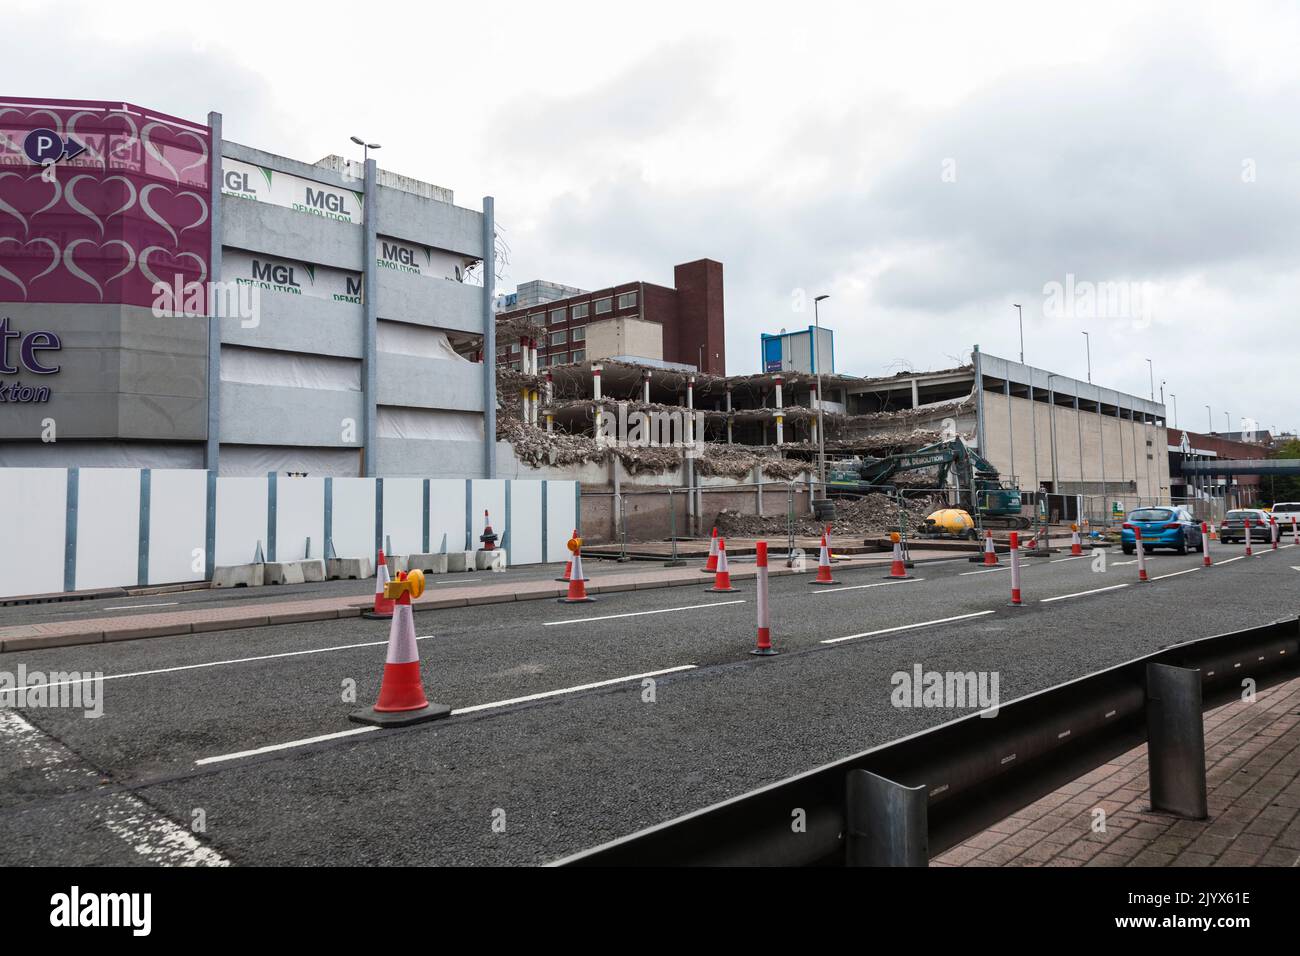 Stockton on Tees, UK. 8th September 2022. Demolition work has started on the Castlegate Centre as part of the Councils plans to open up the High Street to the riverside. David Dixon /Alamy Stock Photo